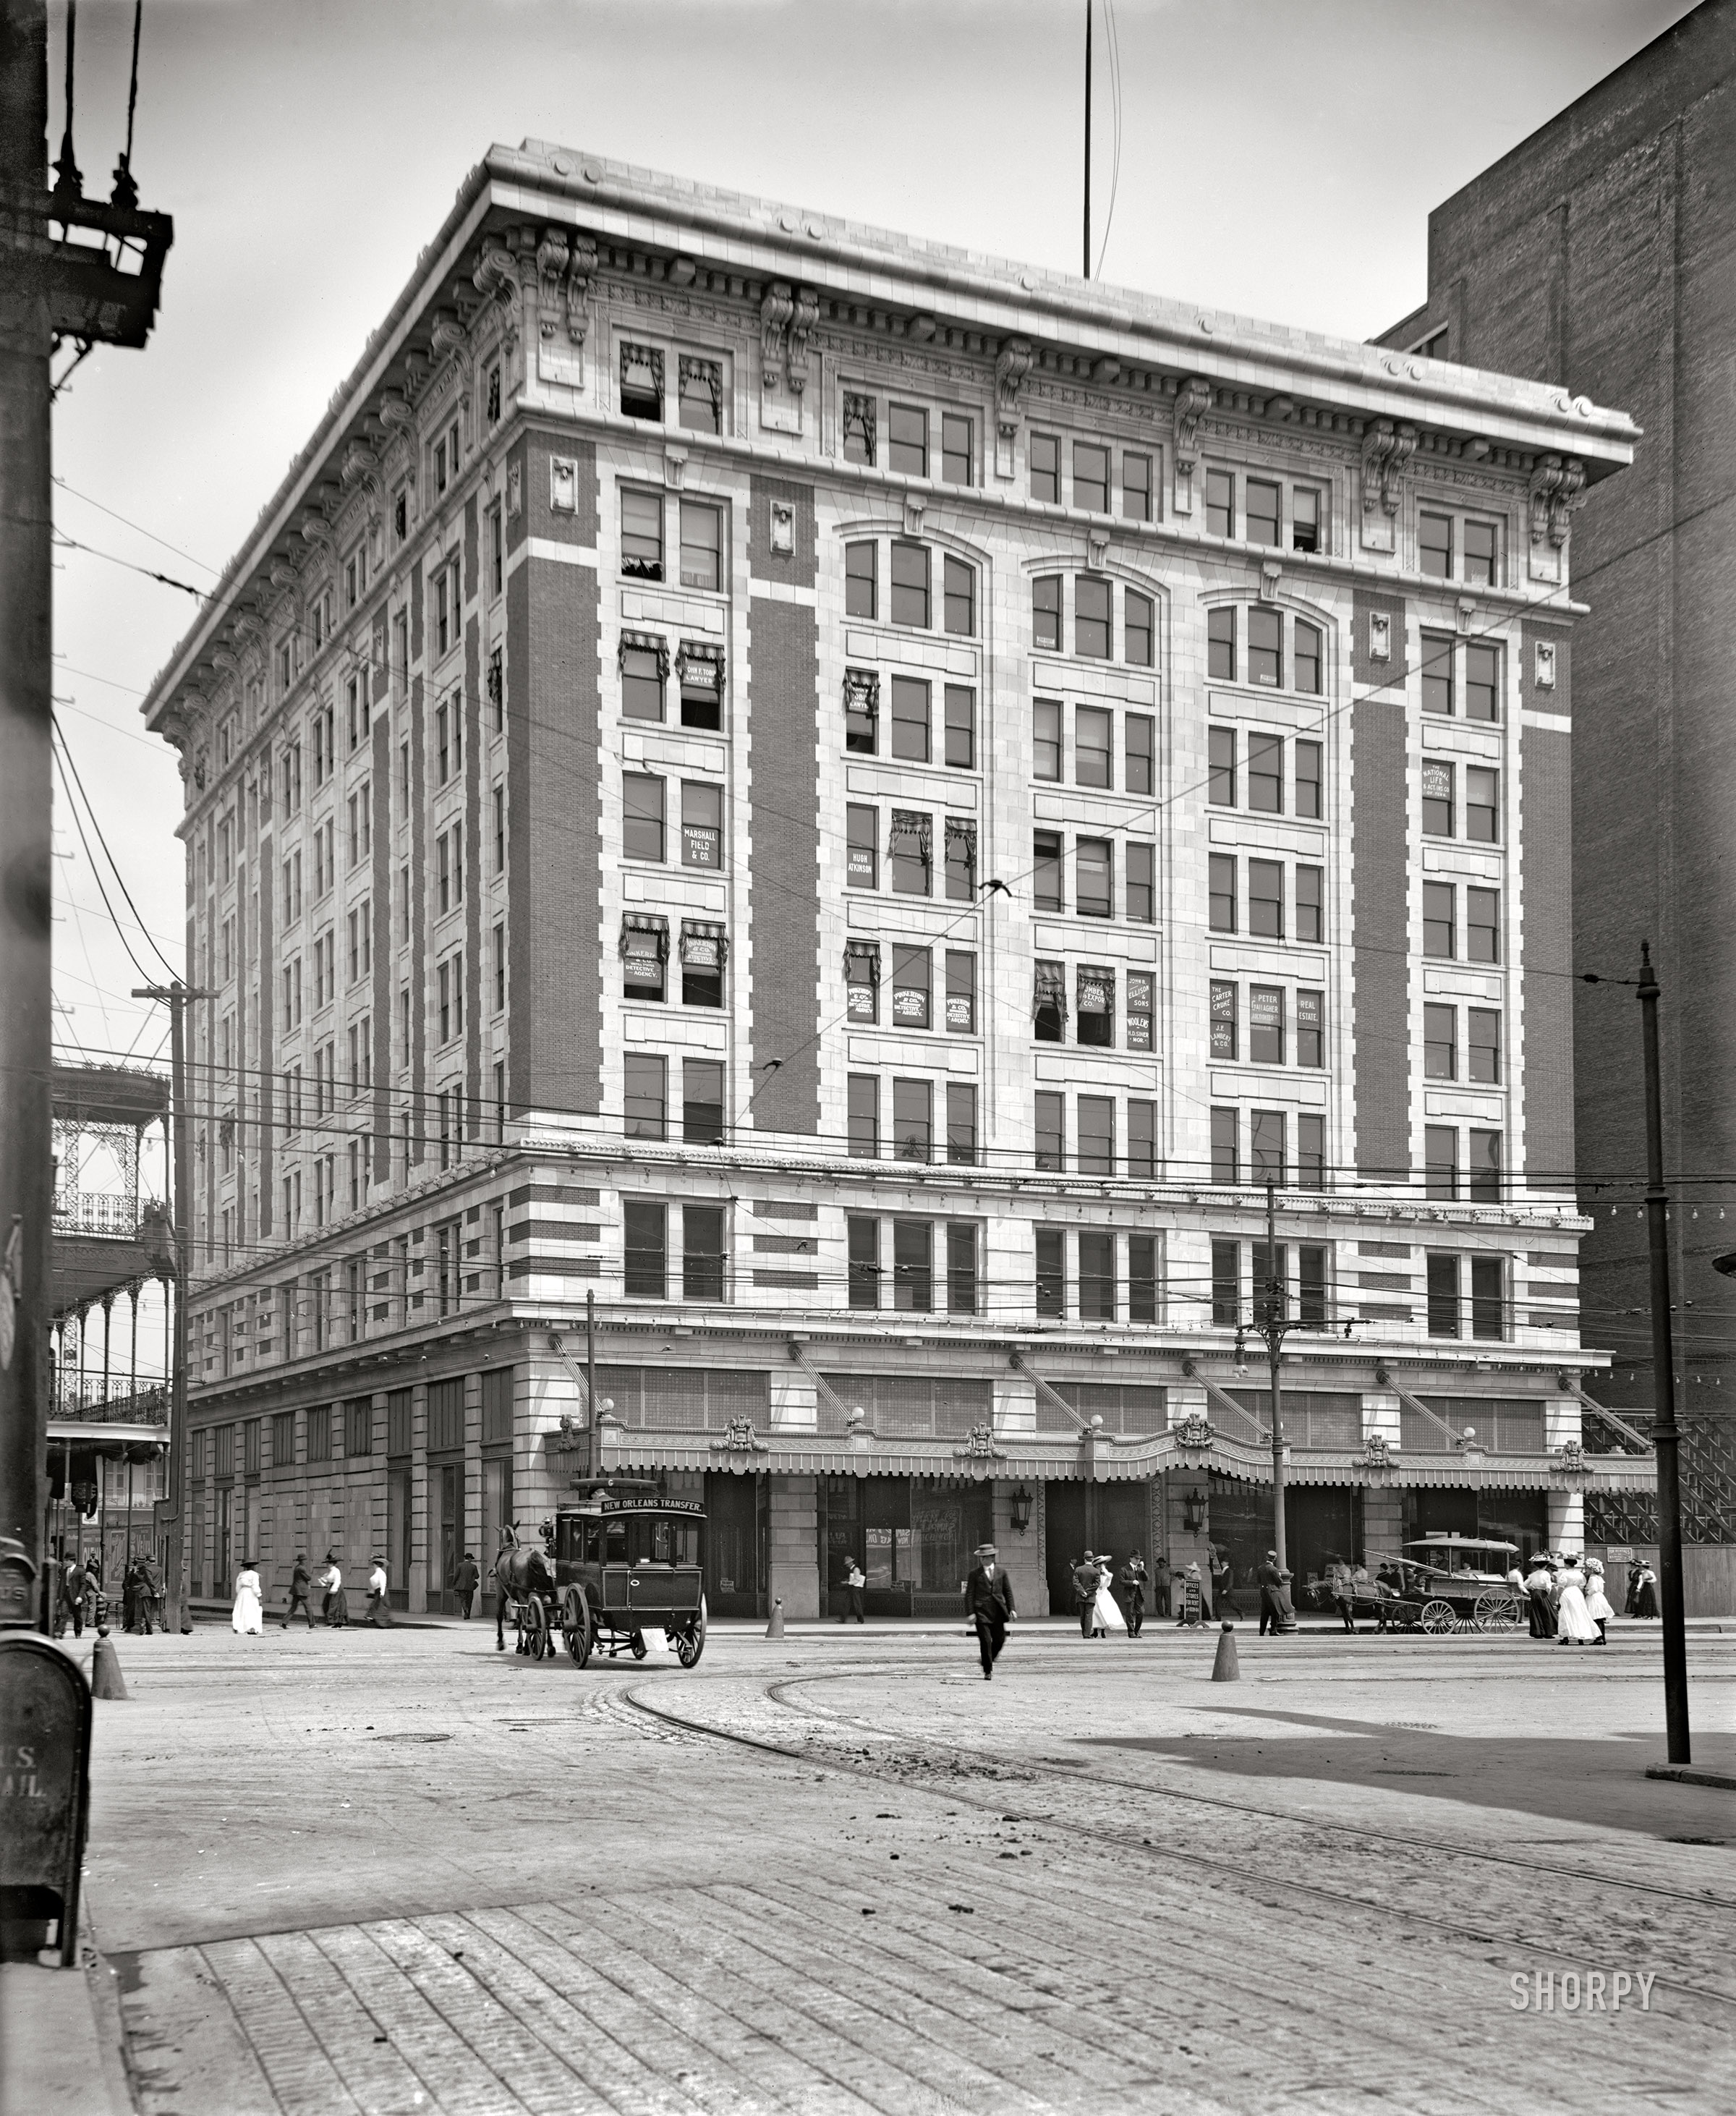 New Orleans circa 1910. "Audubon Building, Canal and Burgundy Sts." This former office building is now the Saint Hotel. 8x10 inch dry plate glass negative. View full size.